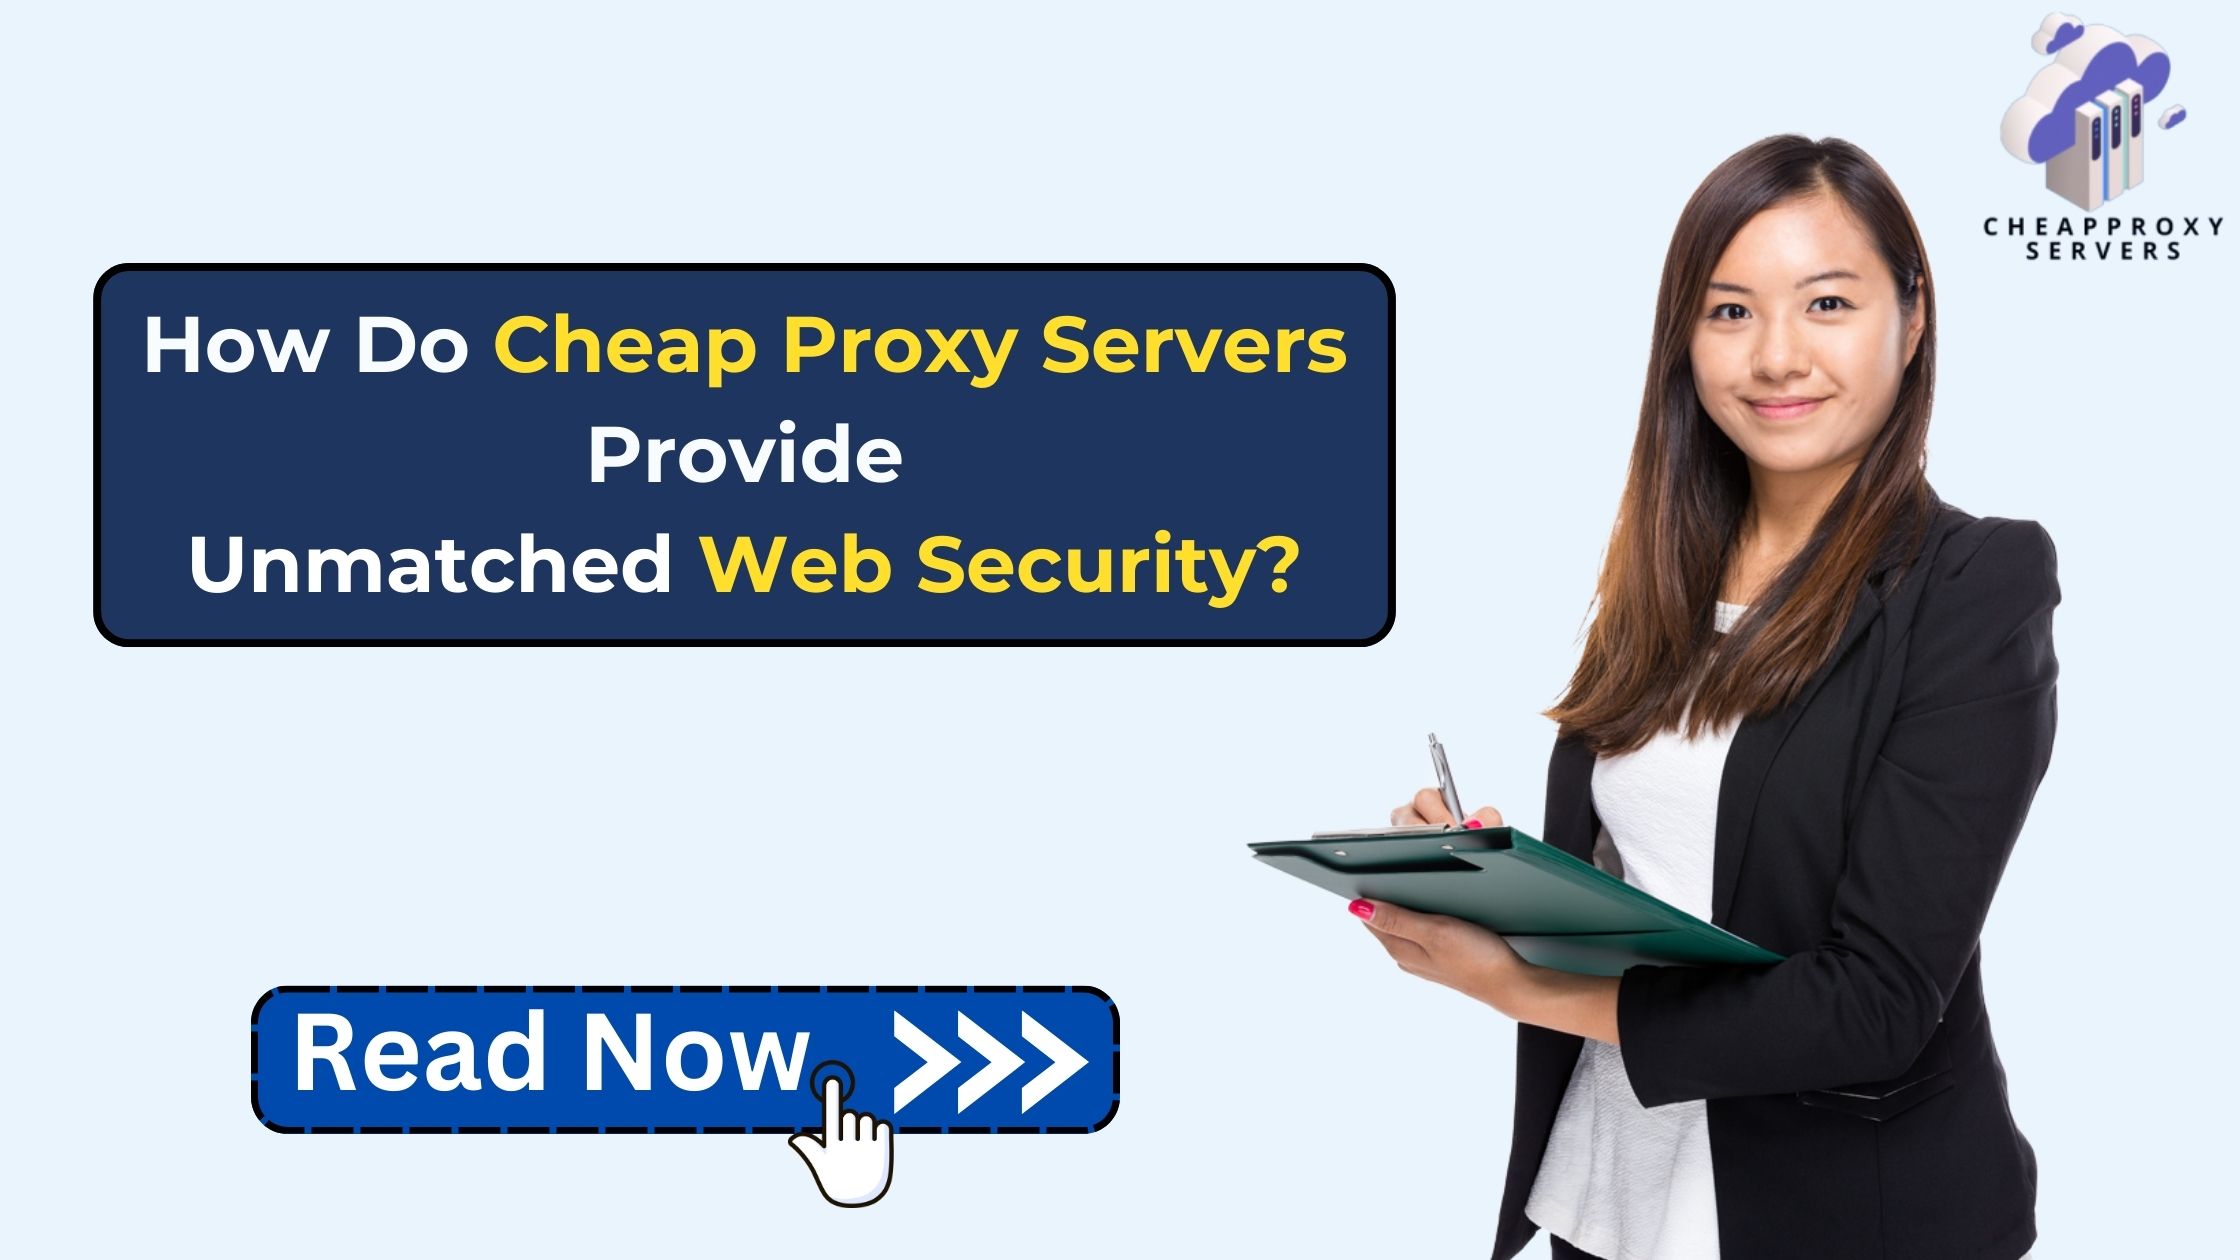 How Do Cheap Proxy Servers Provide Unmatched Web Security